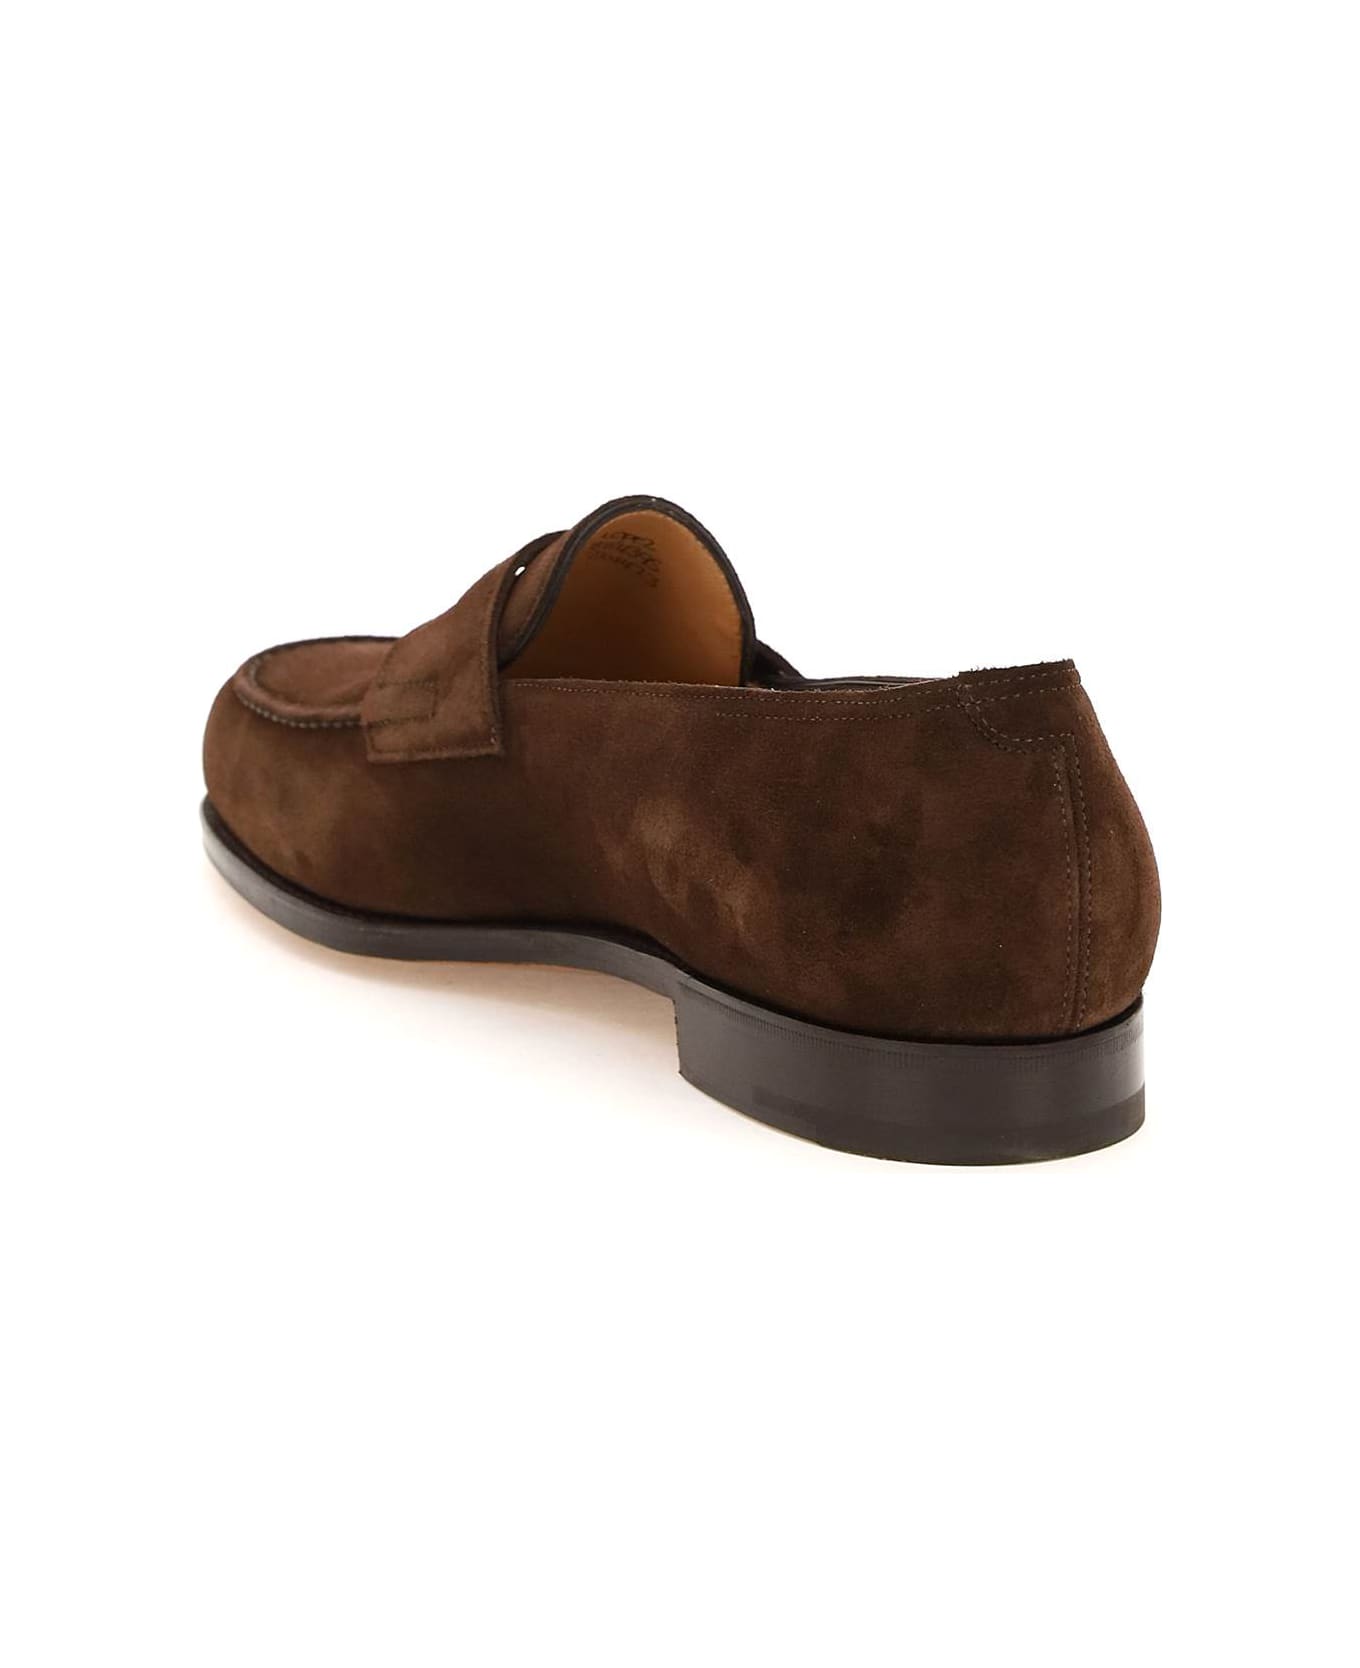 John Lobb Suede Leather Lopez Penny Loafers - DARK BROWN (Brown)